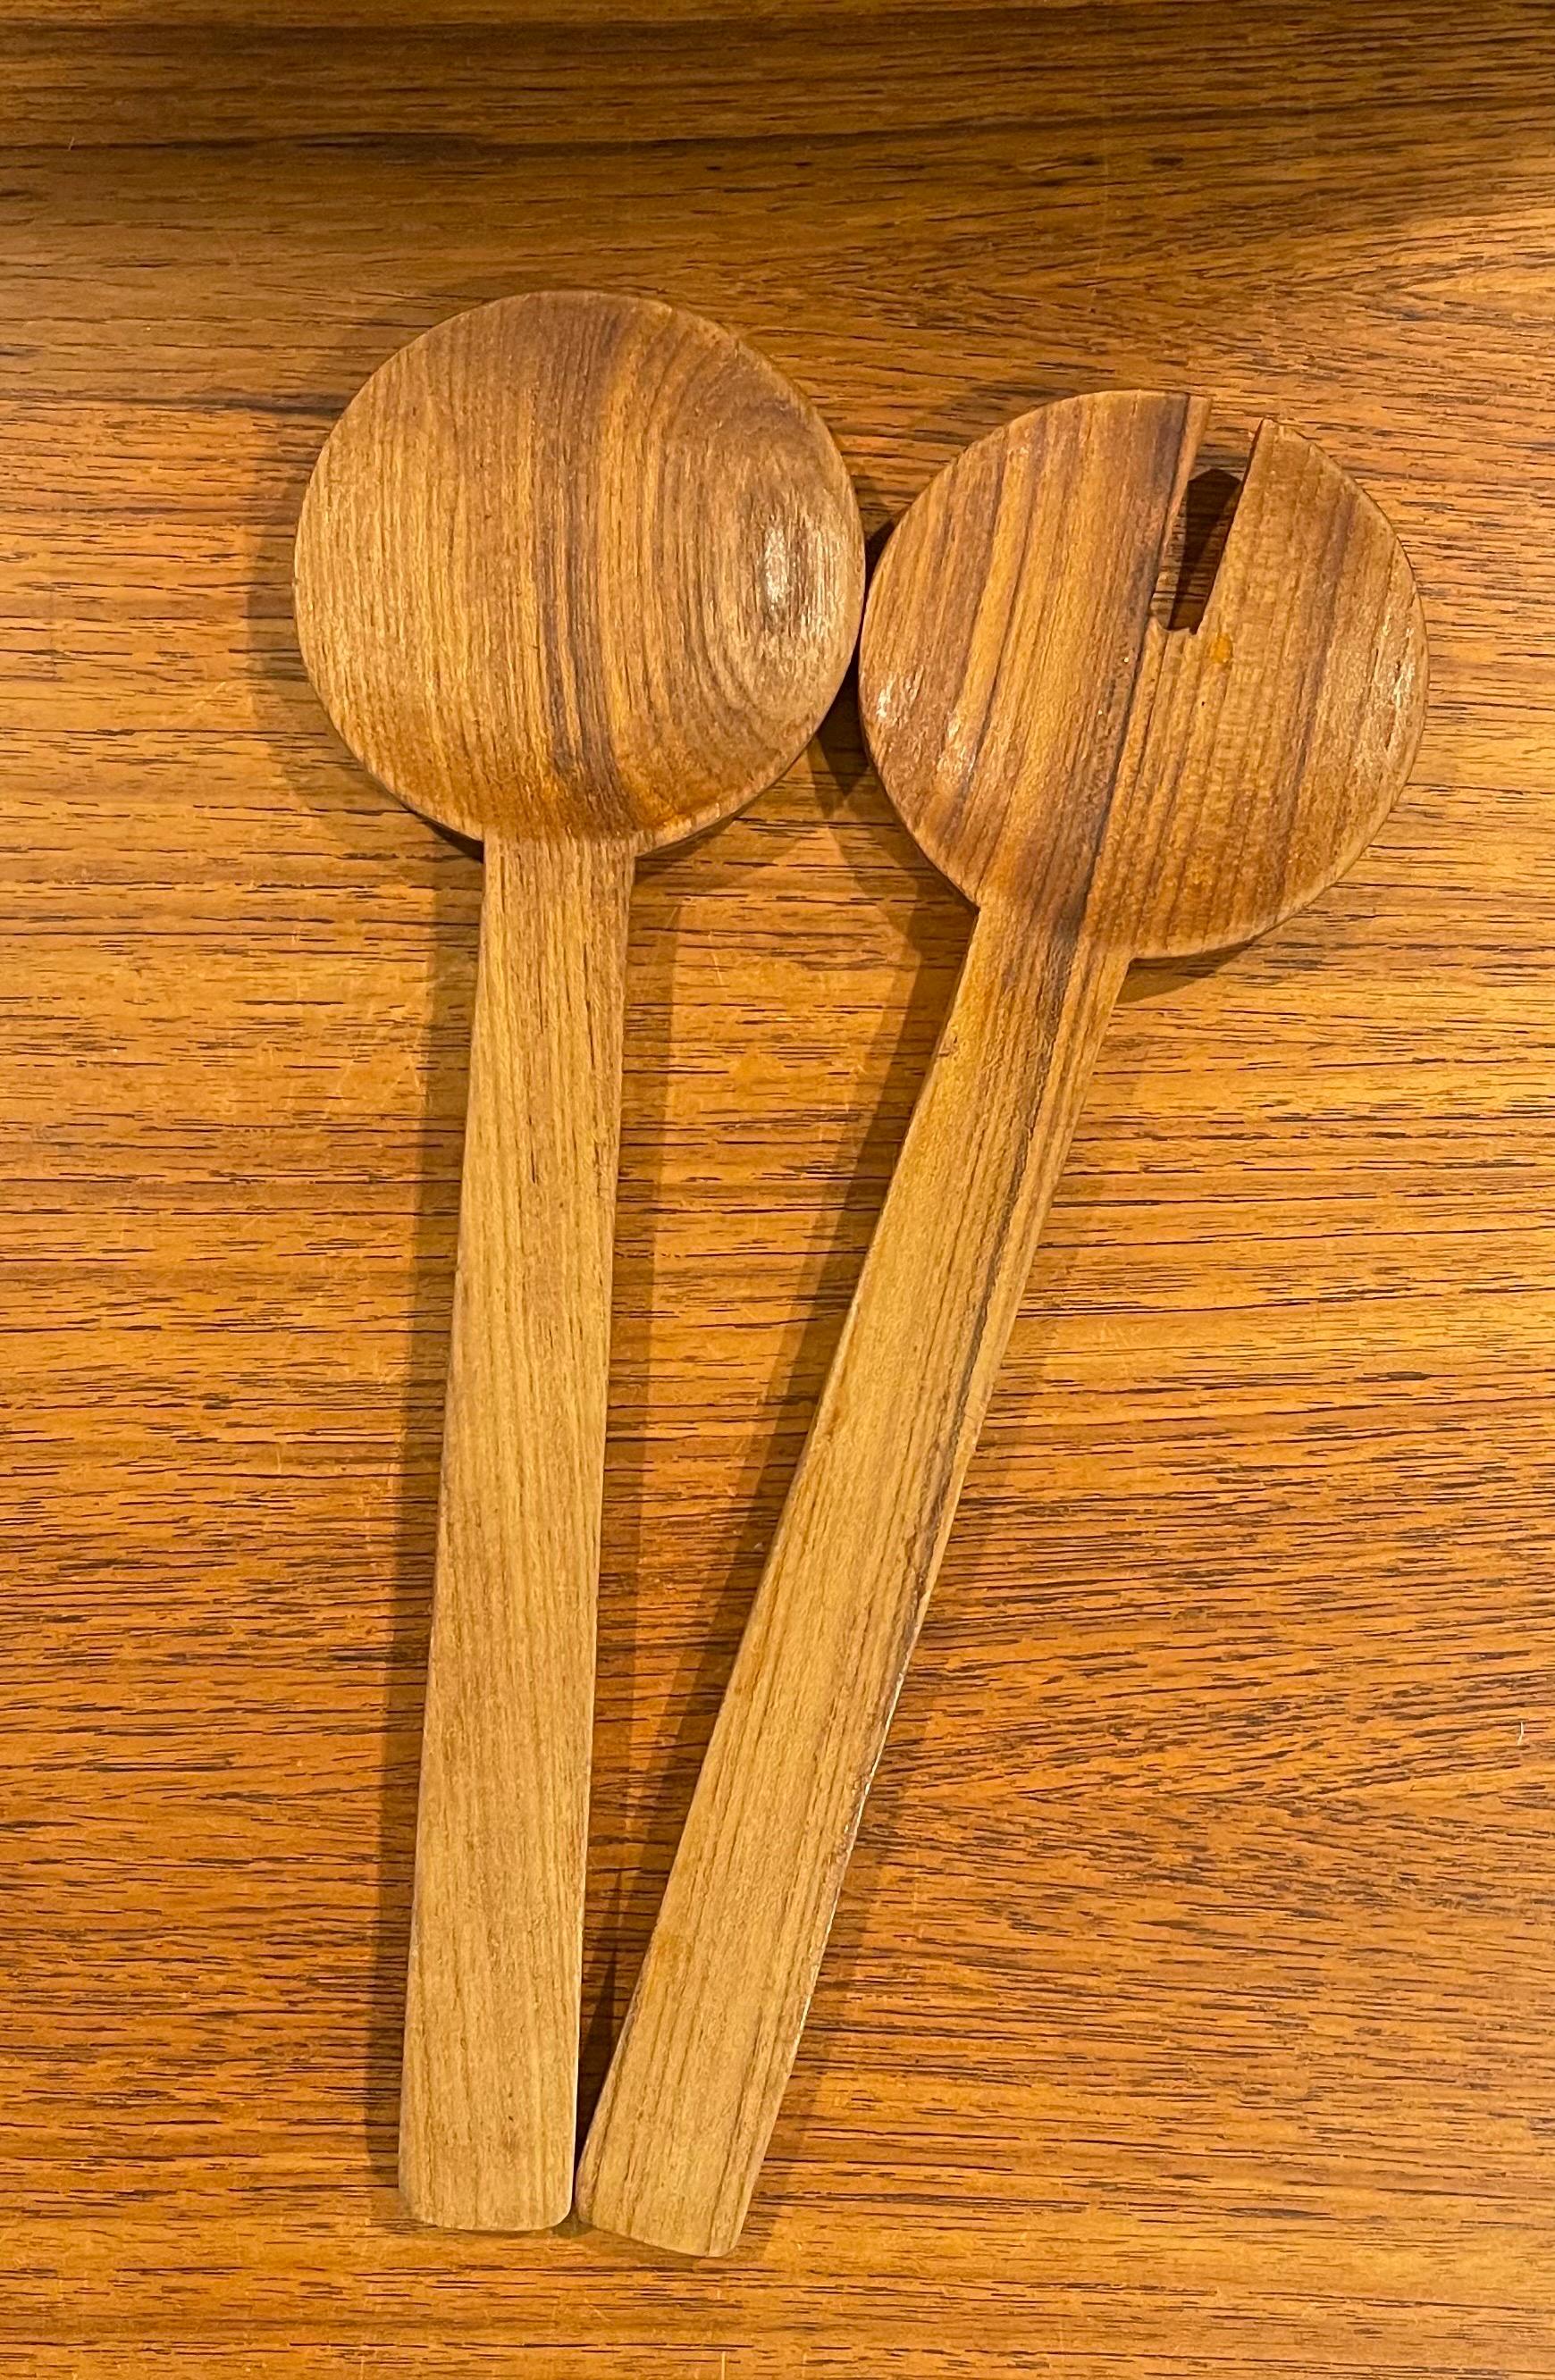 A nice pair of Pair of Danish Modern teak salad servers, circa 1970s. The servers are made of solid teak and they measure 12